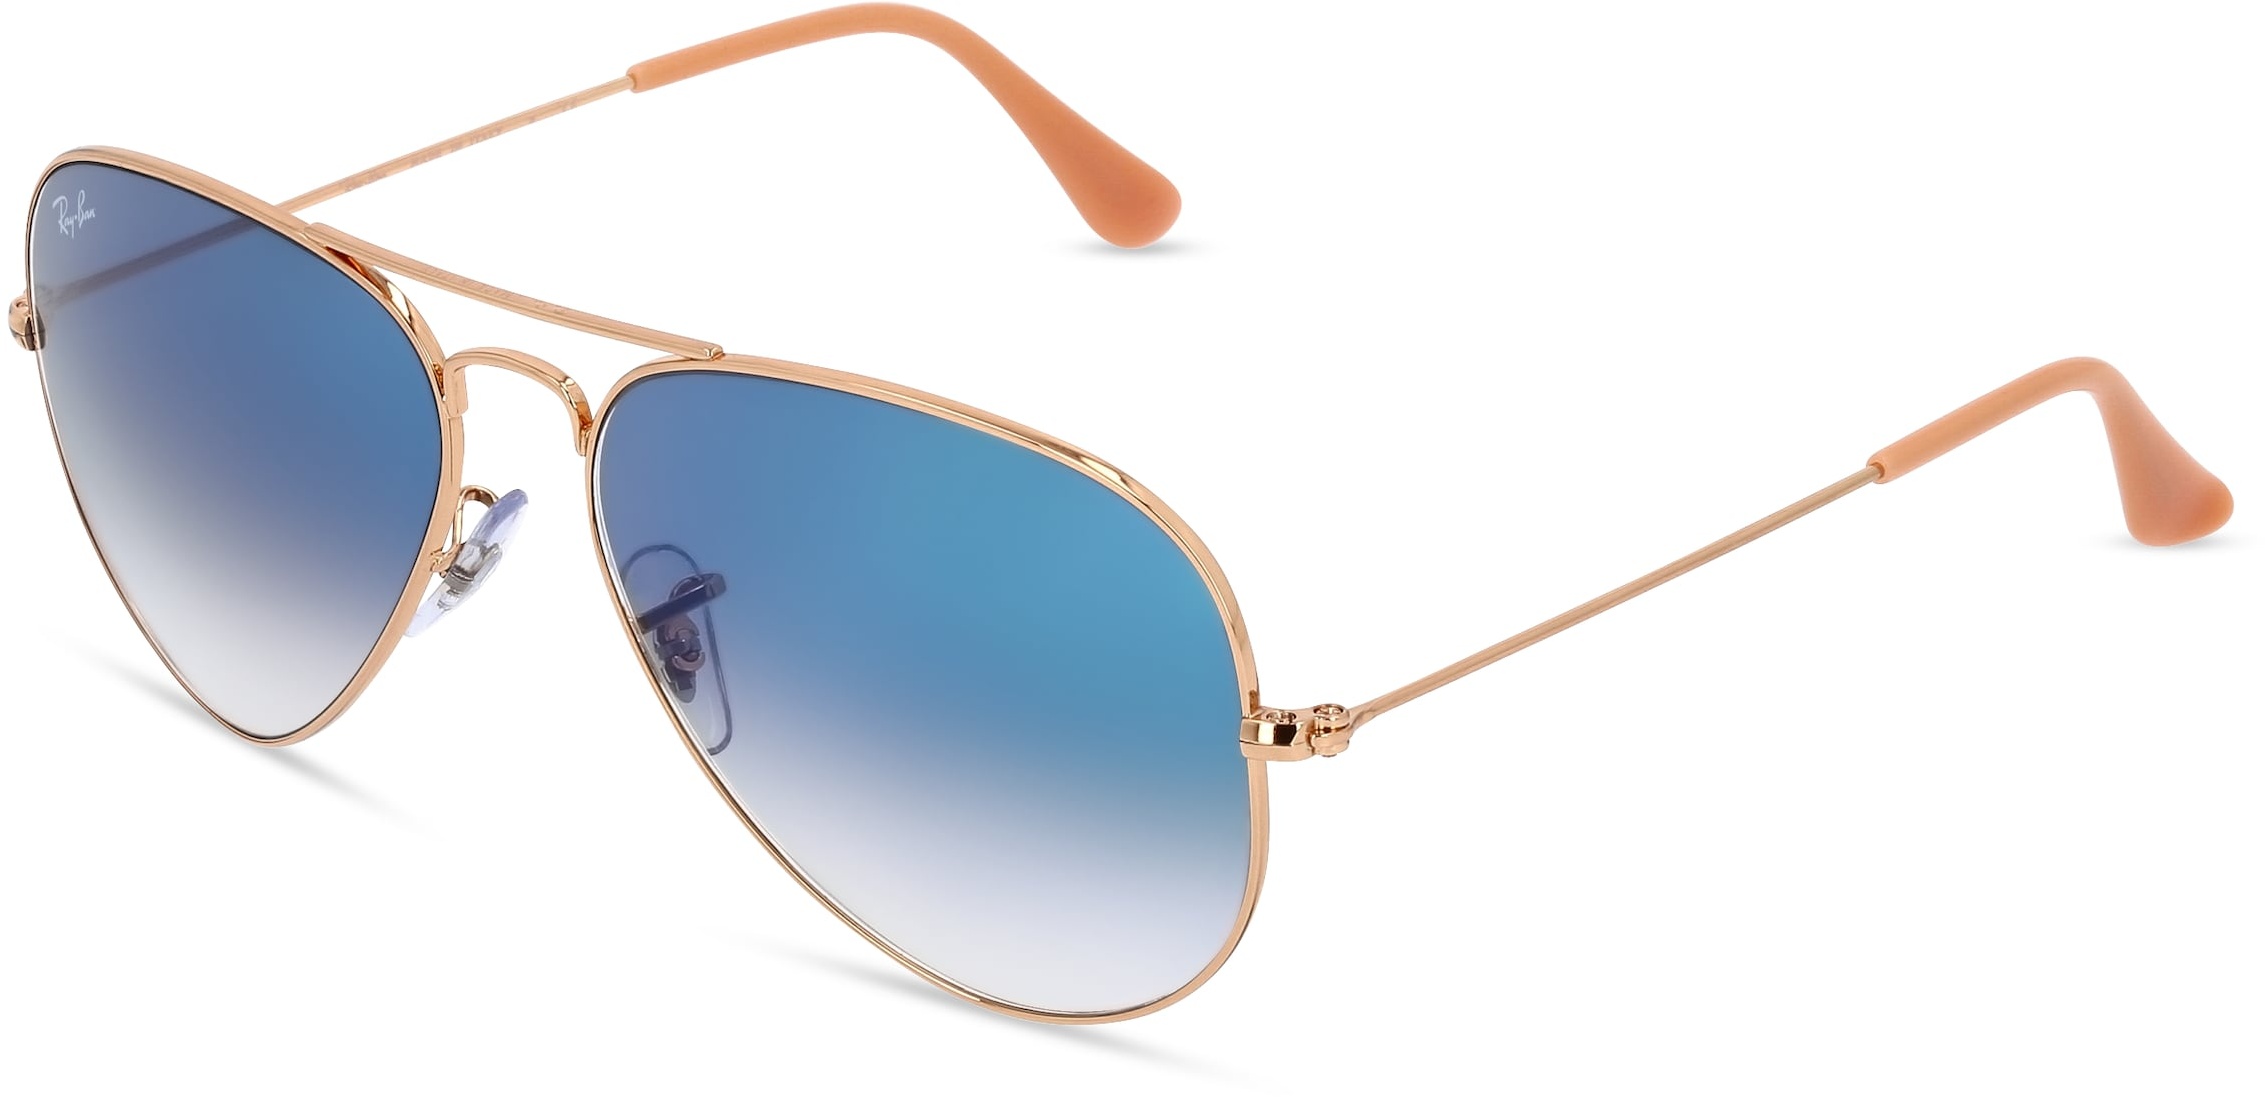 Ray-Ban RB 3025 AVIATOR LARGE METAL Unisex-Sonnenbrille Vollrand Pilot Metall-Gestell, gold